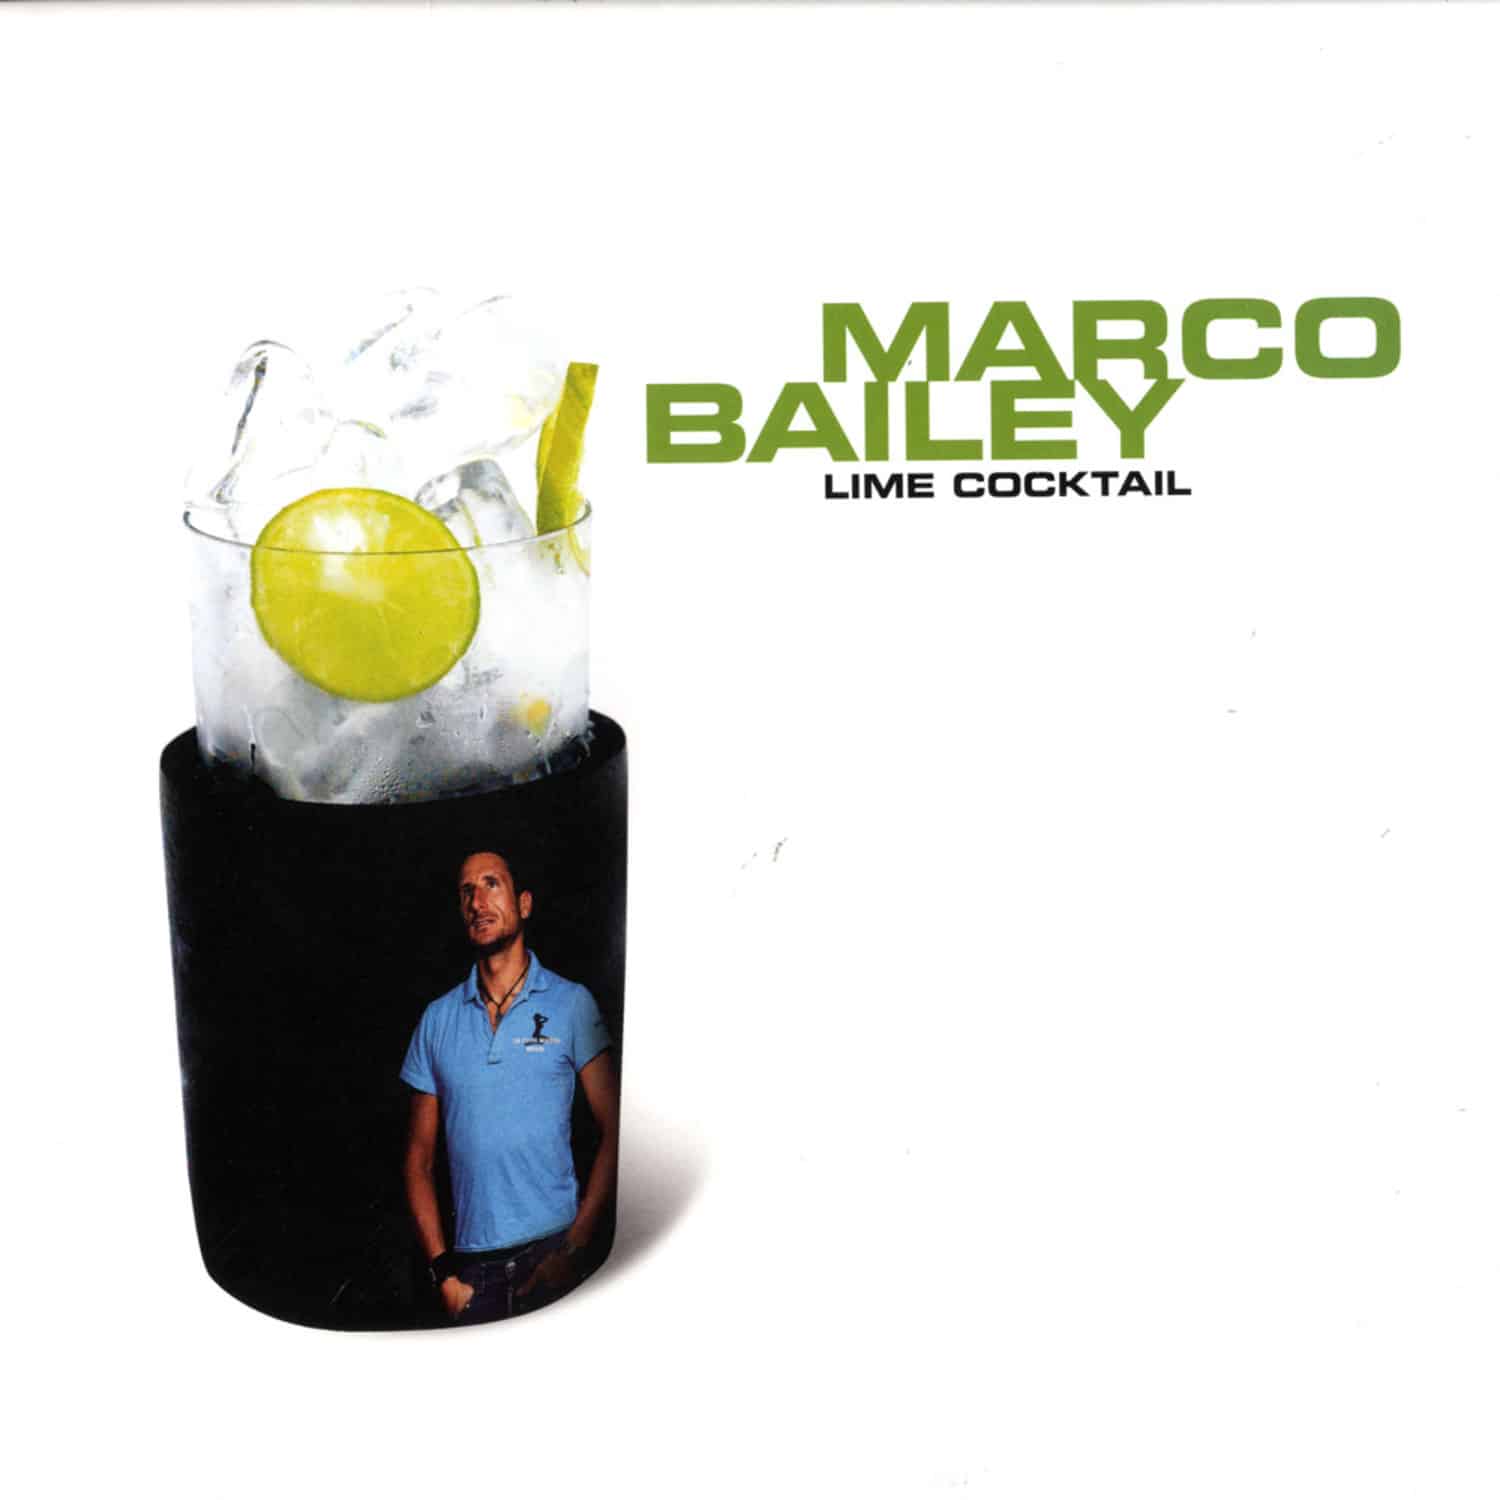 Marco Bailey - LIME COCKTAIL